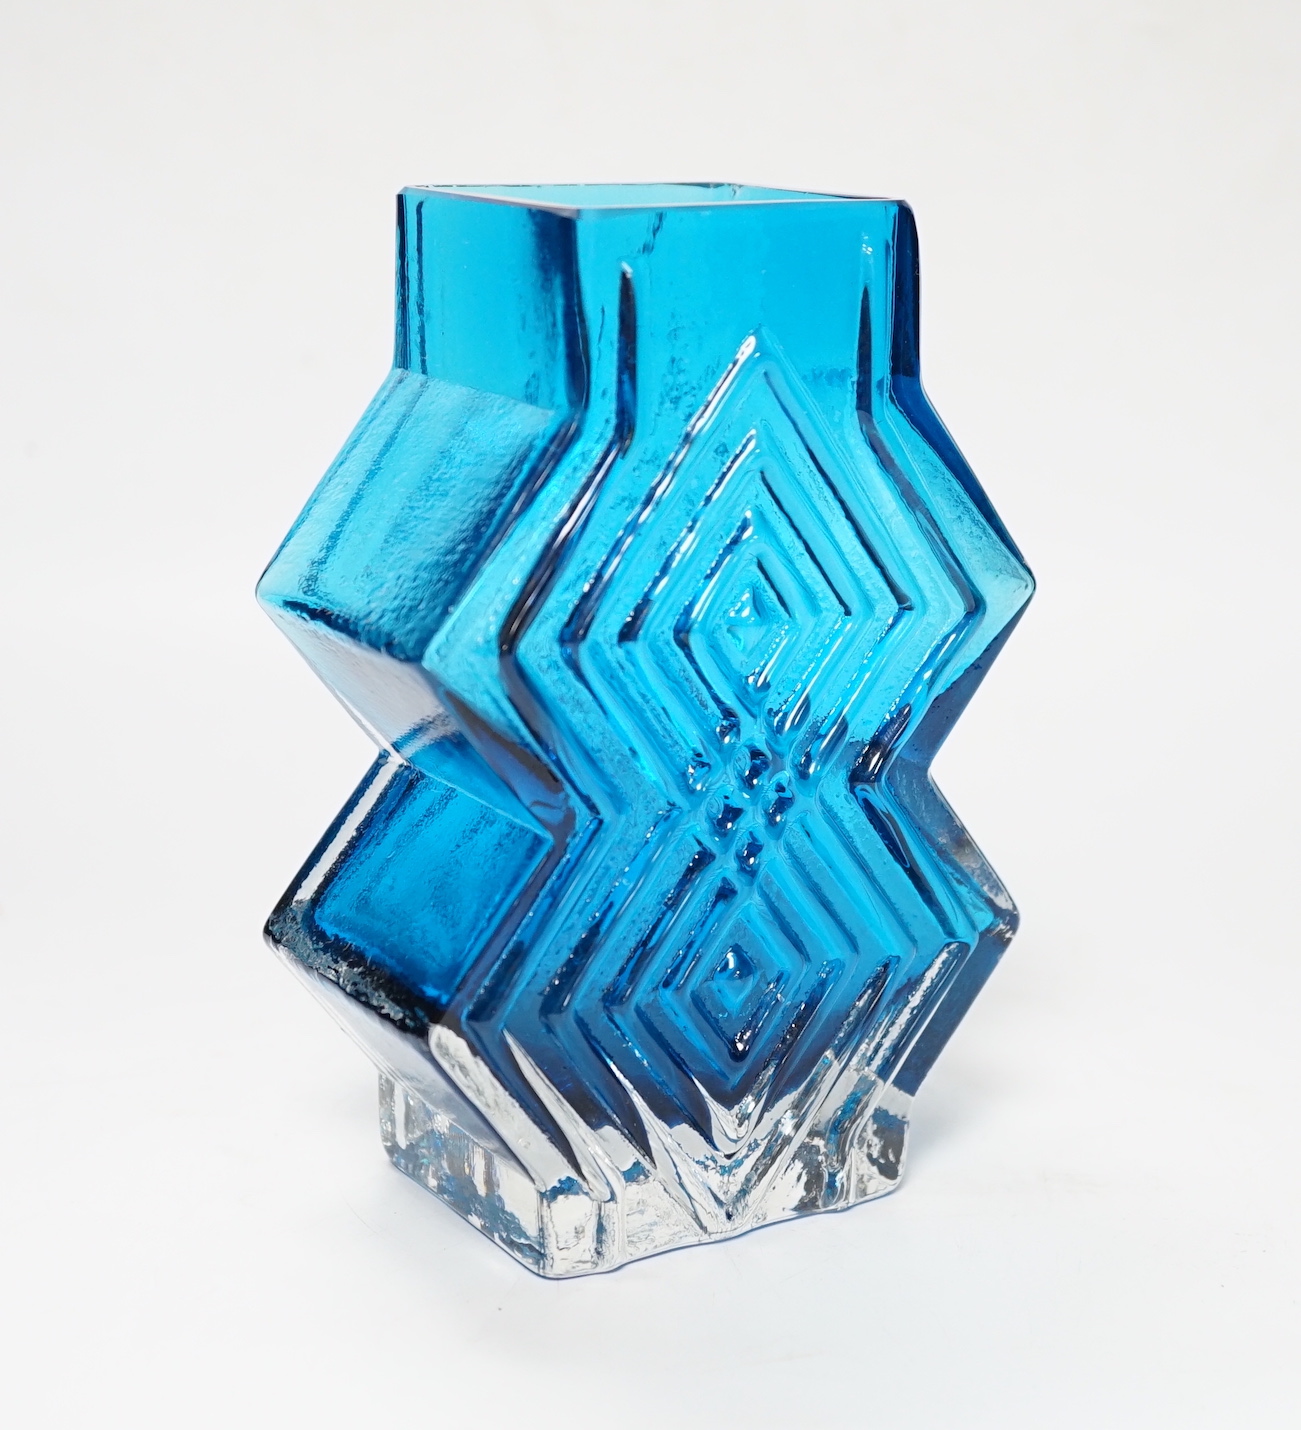 A Geoffrey Baxter for Whitefriars double diamond vase in kingfisher blue, 16cm high